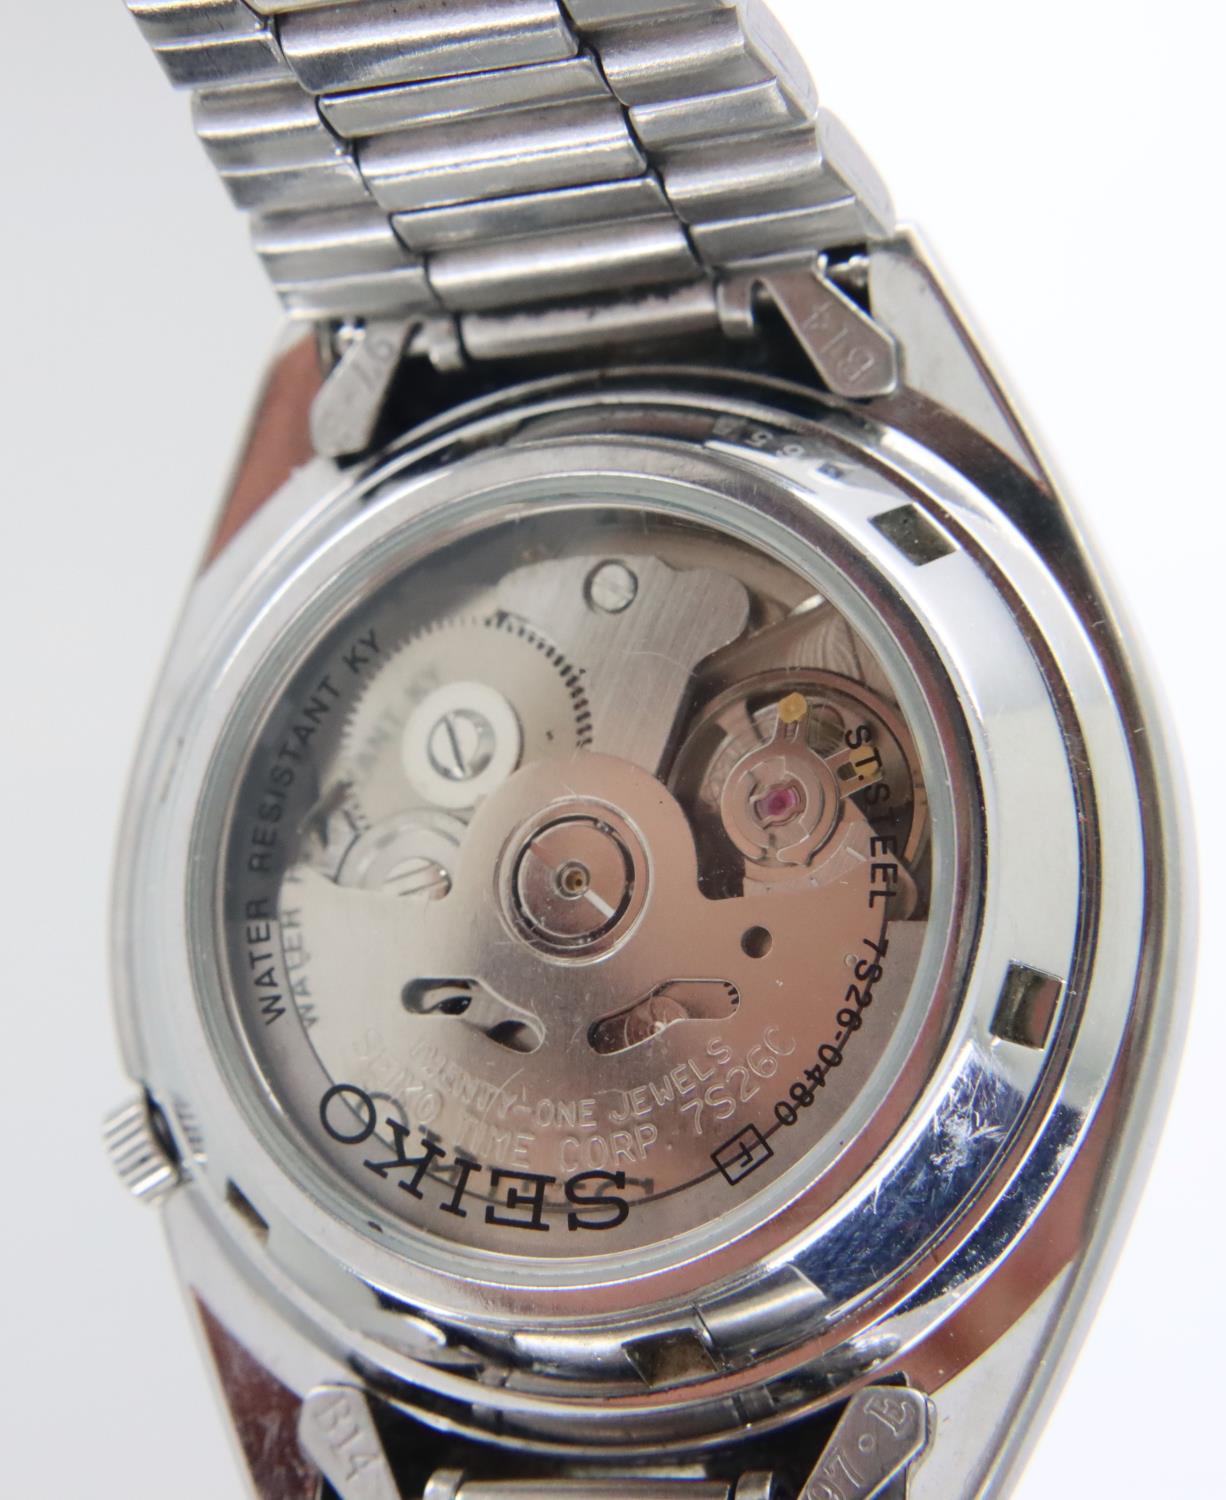 Seiko; gents 5 automatic wristwatch, day date, silver dials, stainless steel bracelet. Working at - Image 2 of 2